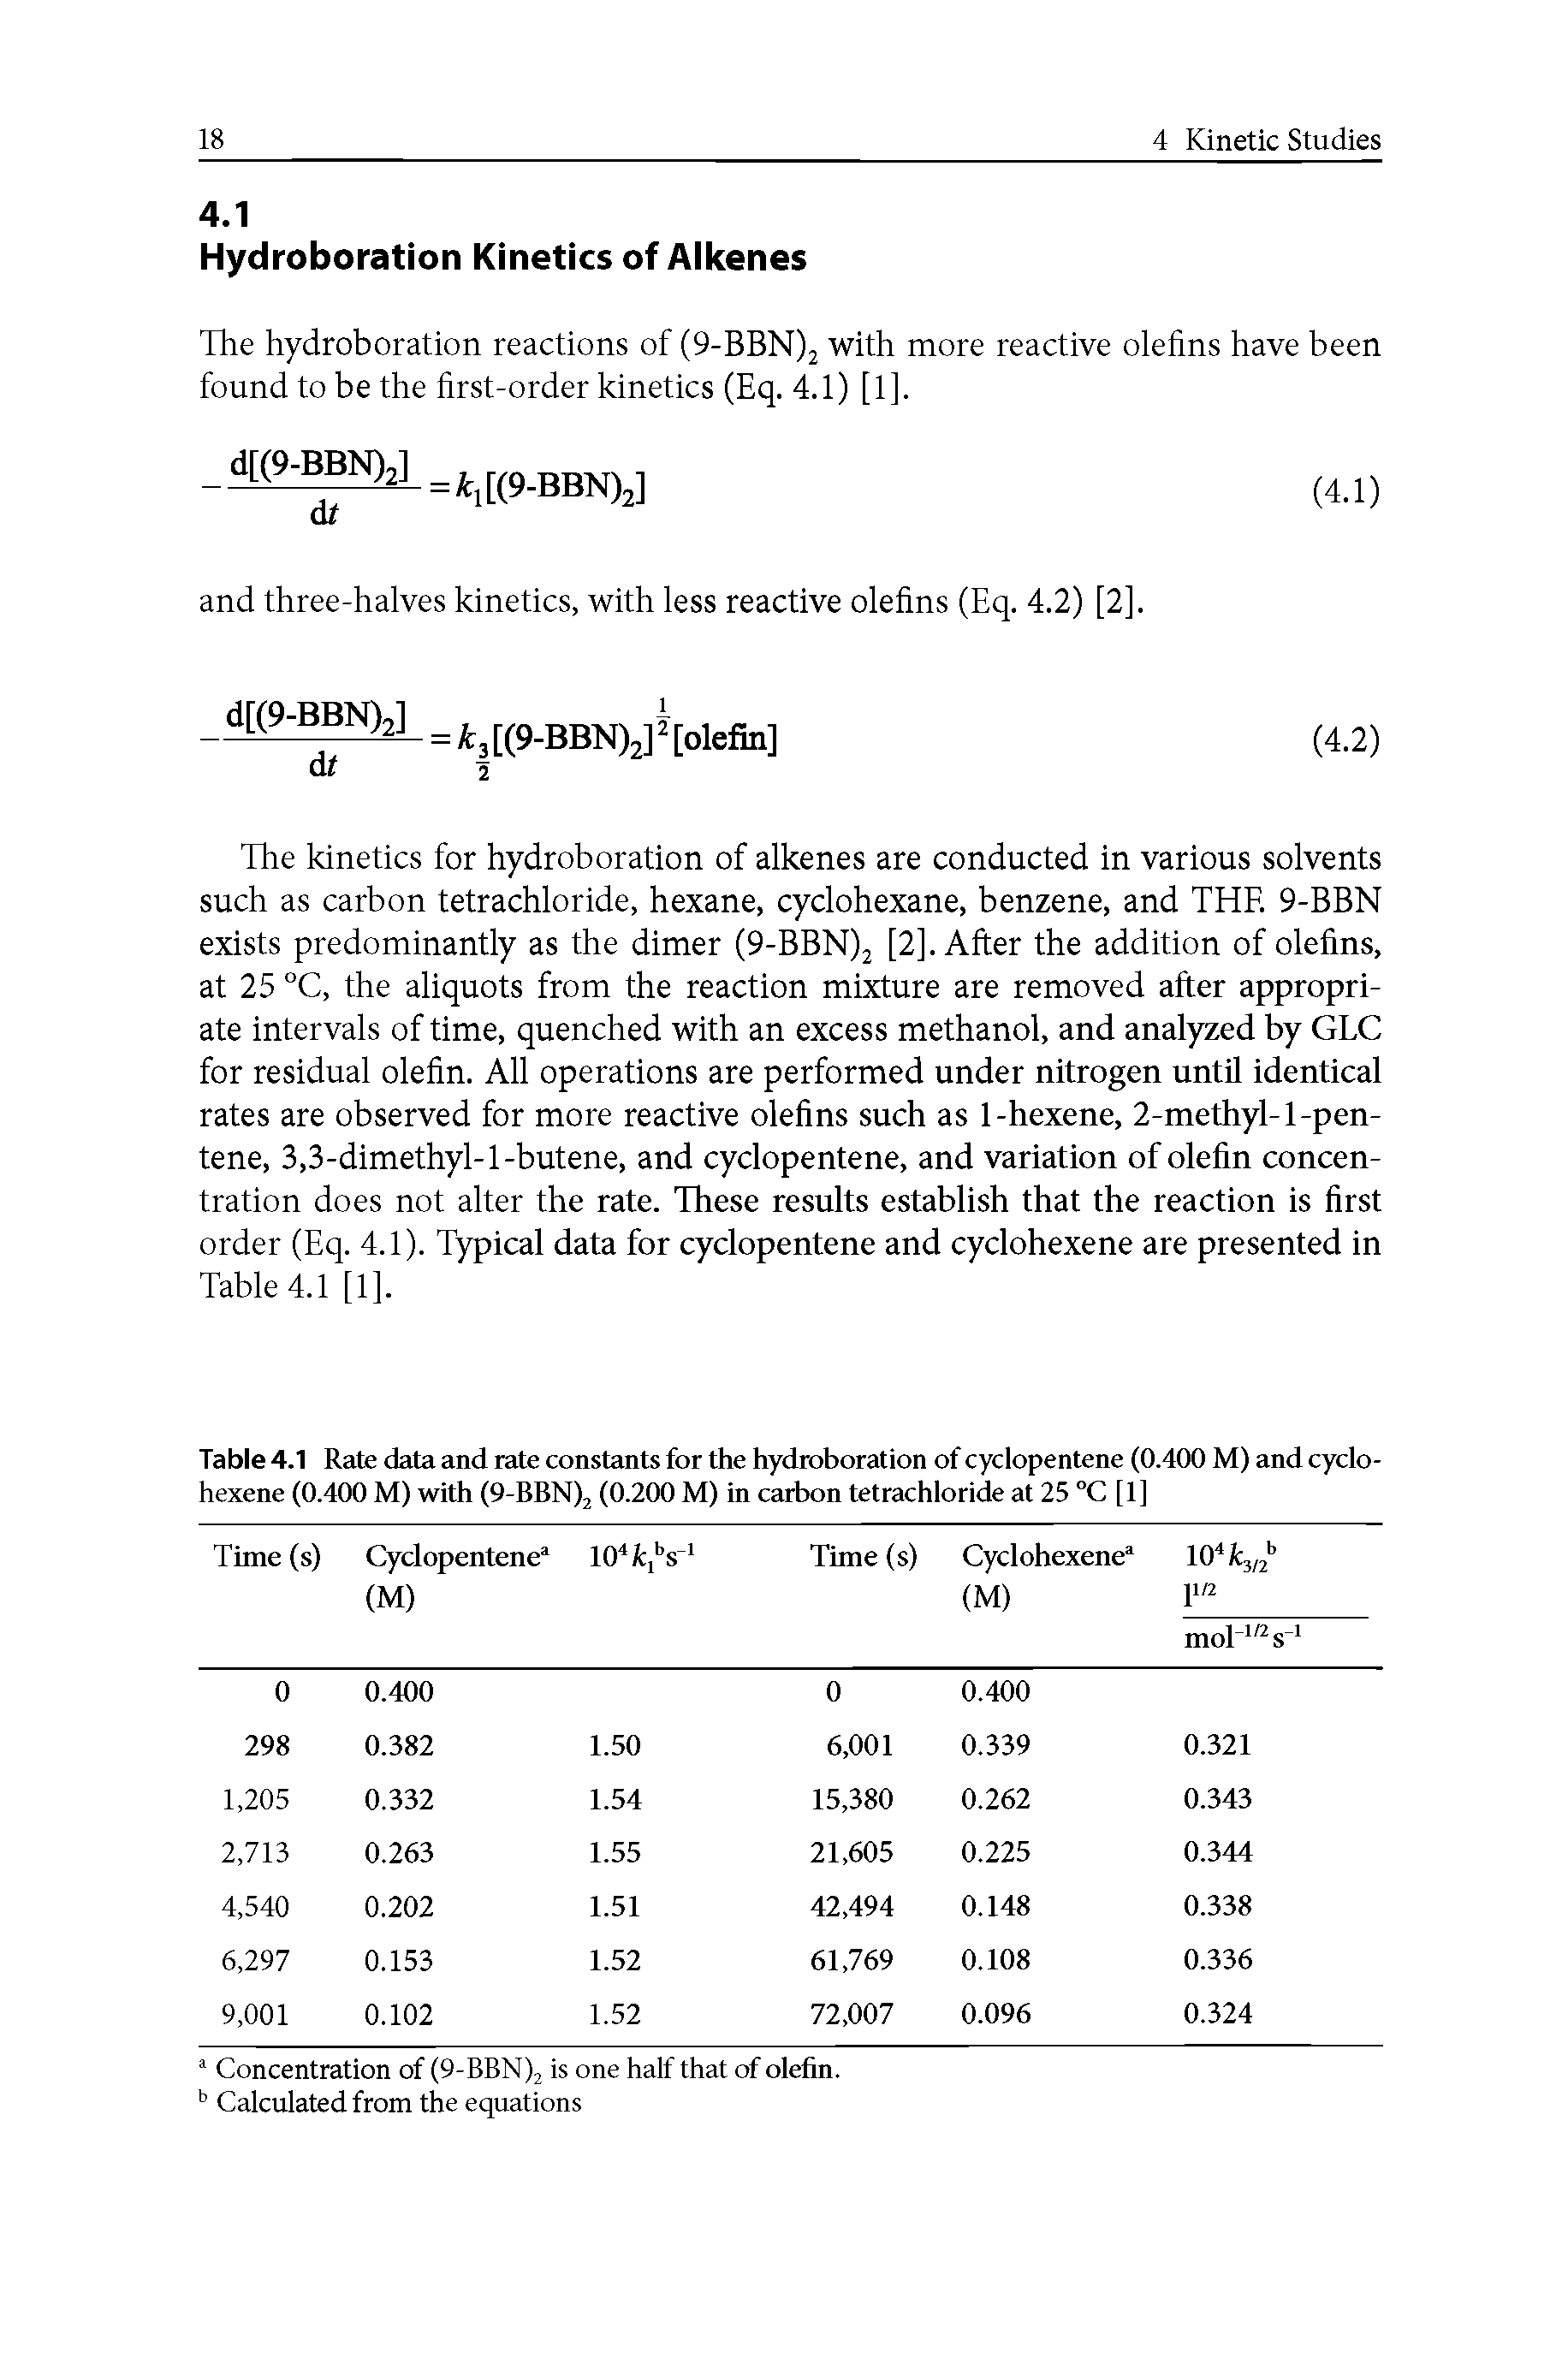 Table 4.1 Rate data and rate constants for the hydroboration of cyclopentene (0.400 M) and cyclohexene (0.400 M) with (O-BBNy (0.200 M) in carbon tetrachloride at 25 C [ 1 ]...